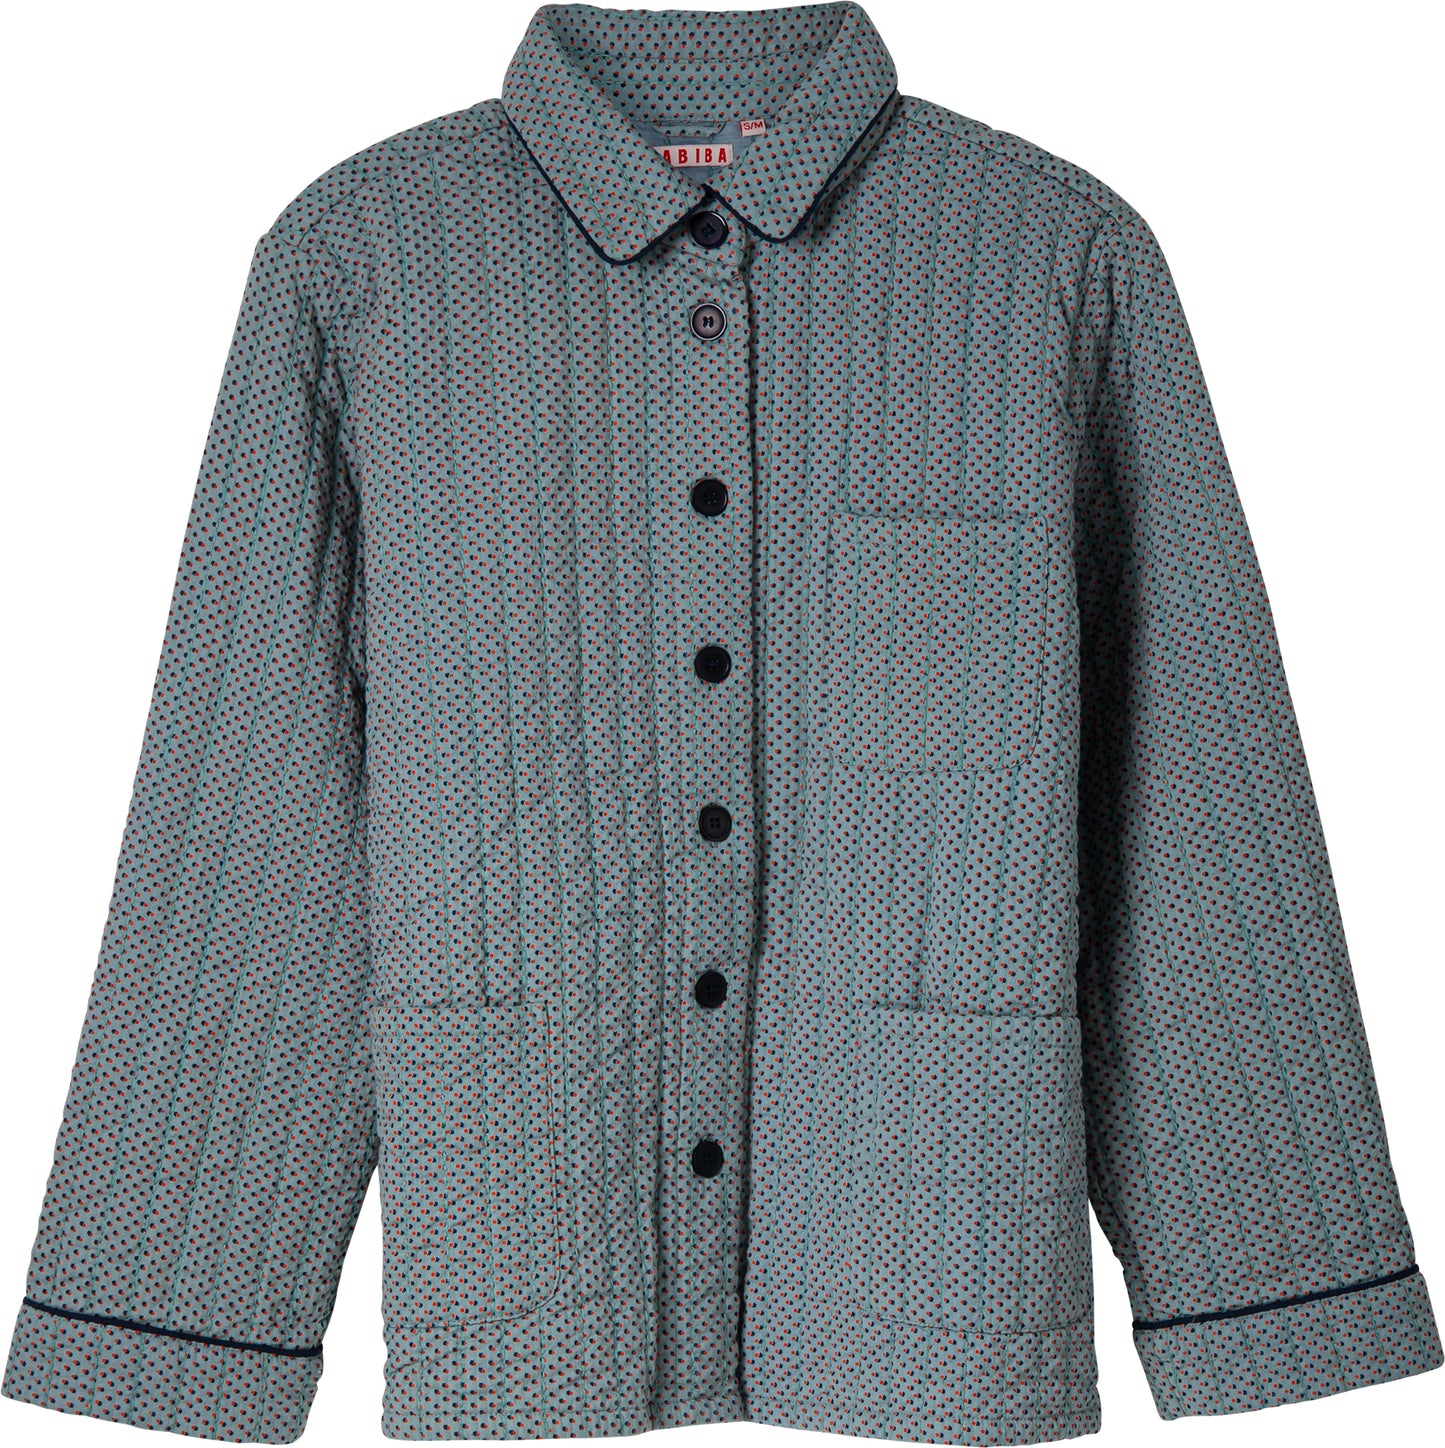 DOTTY QUILTED JACKET - Pastel blue